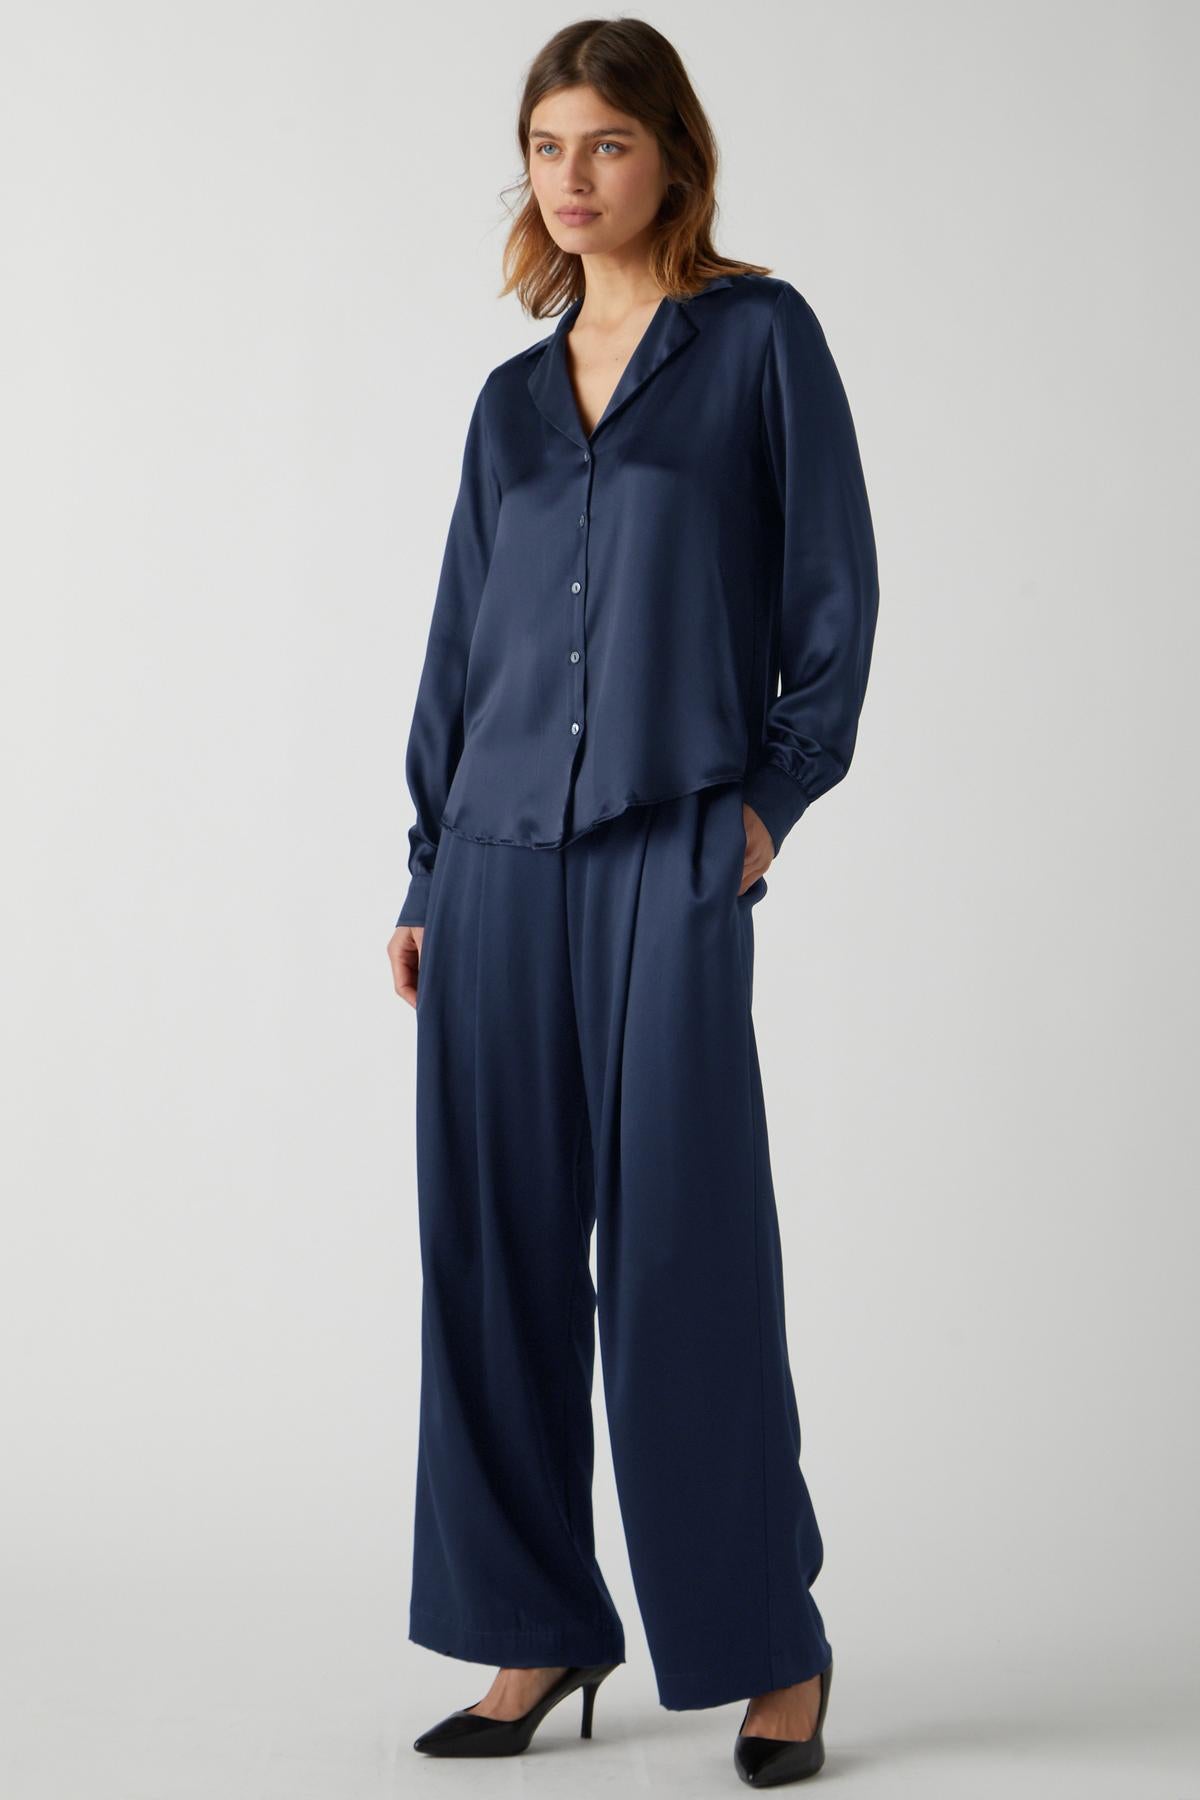 The model is wearing a Velvet by Jenny Graham SOHO TOP and wide leg pants.-35548175073473